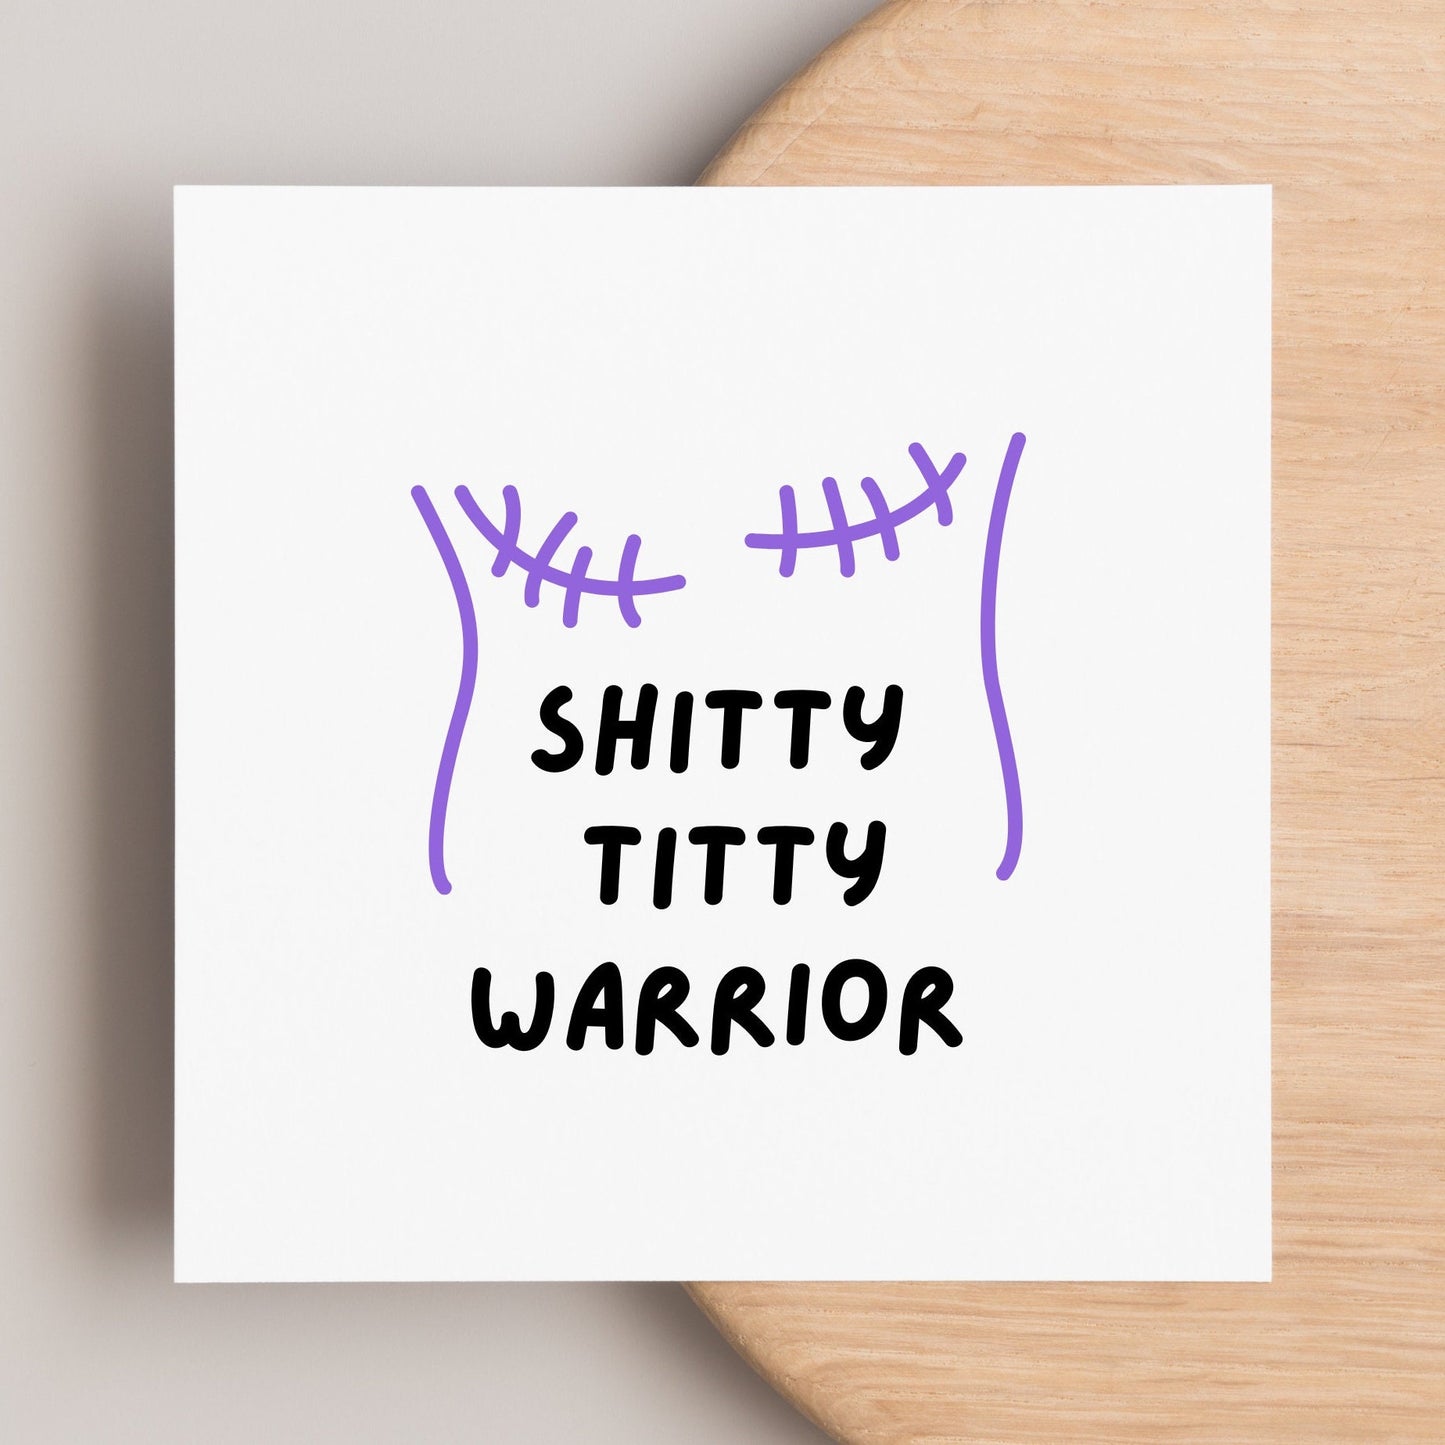 Shitty titty warrior card, chemo card, for friend having chemo, fighting breast cancer, double mastectomy op get well soon